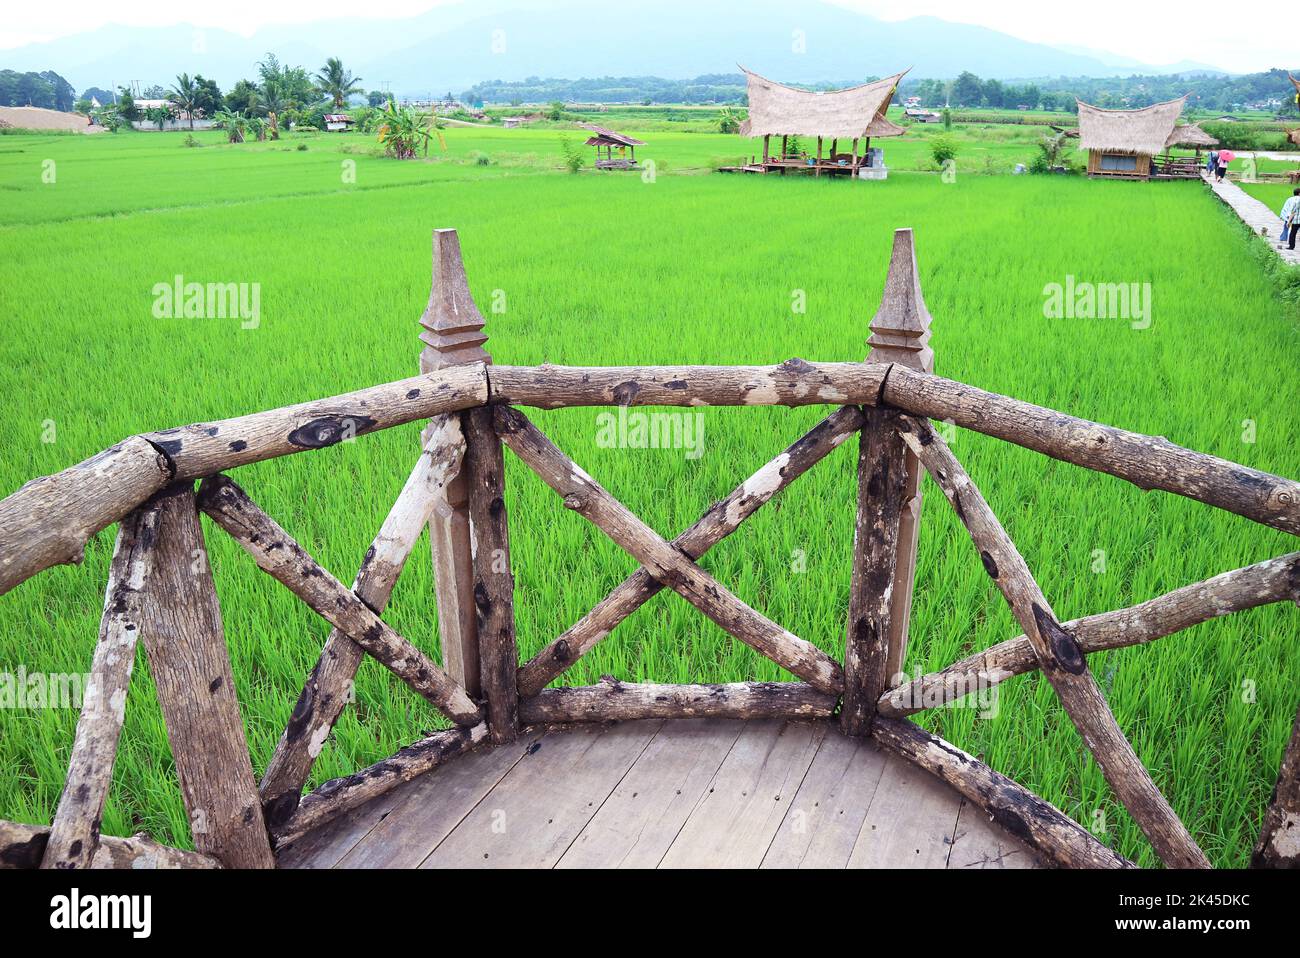 Wooden viewing terrace on the vibrant green paddy field, Thailand Stock Photo